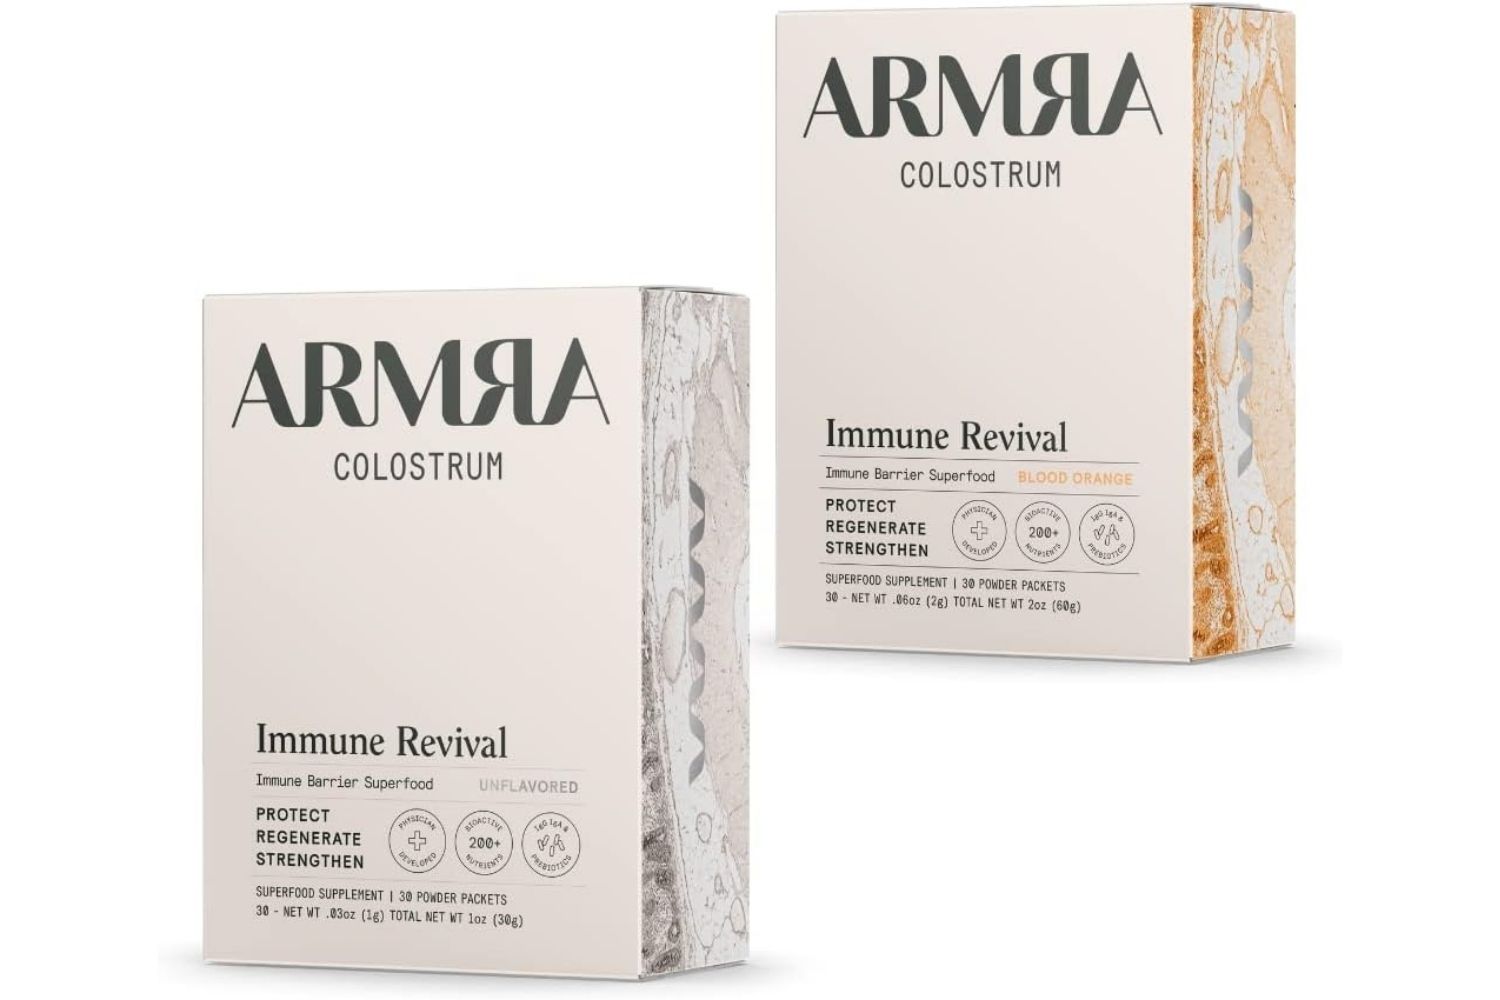 15-intriguing-facts-about-armra-colostrum